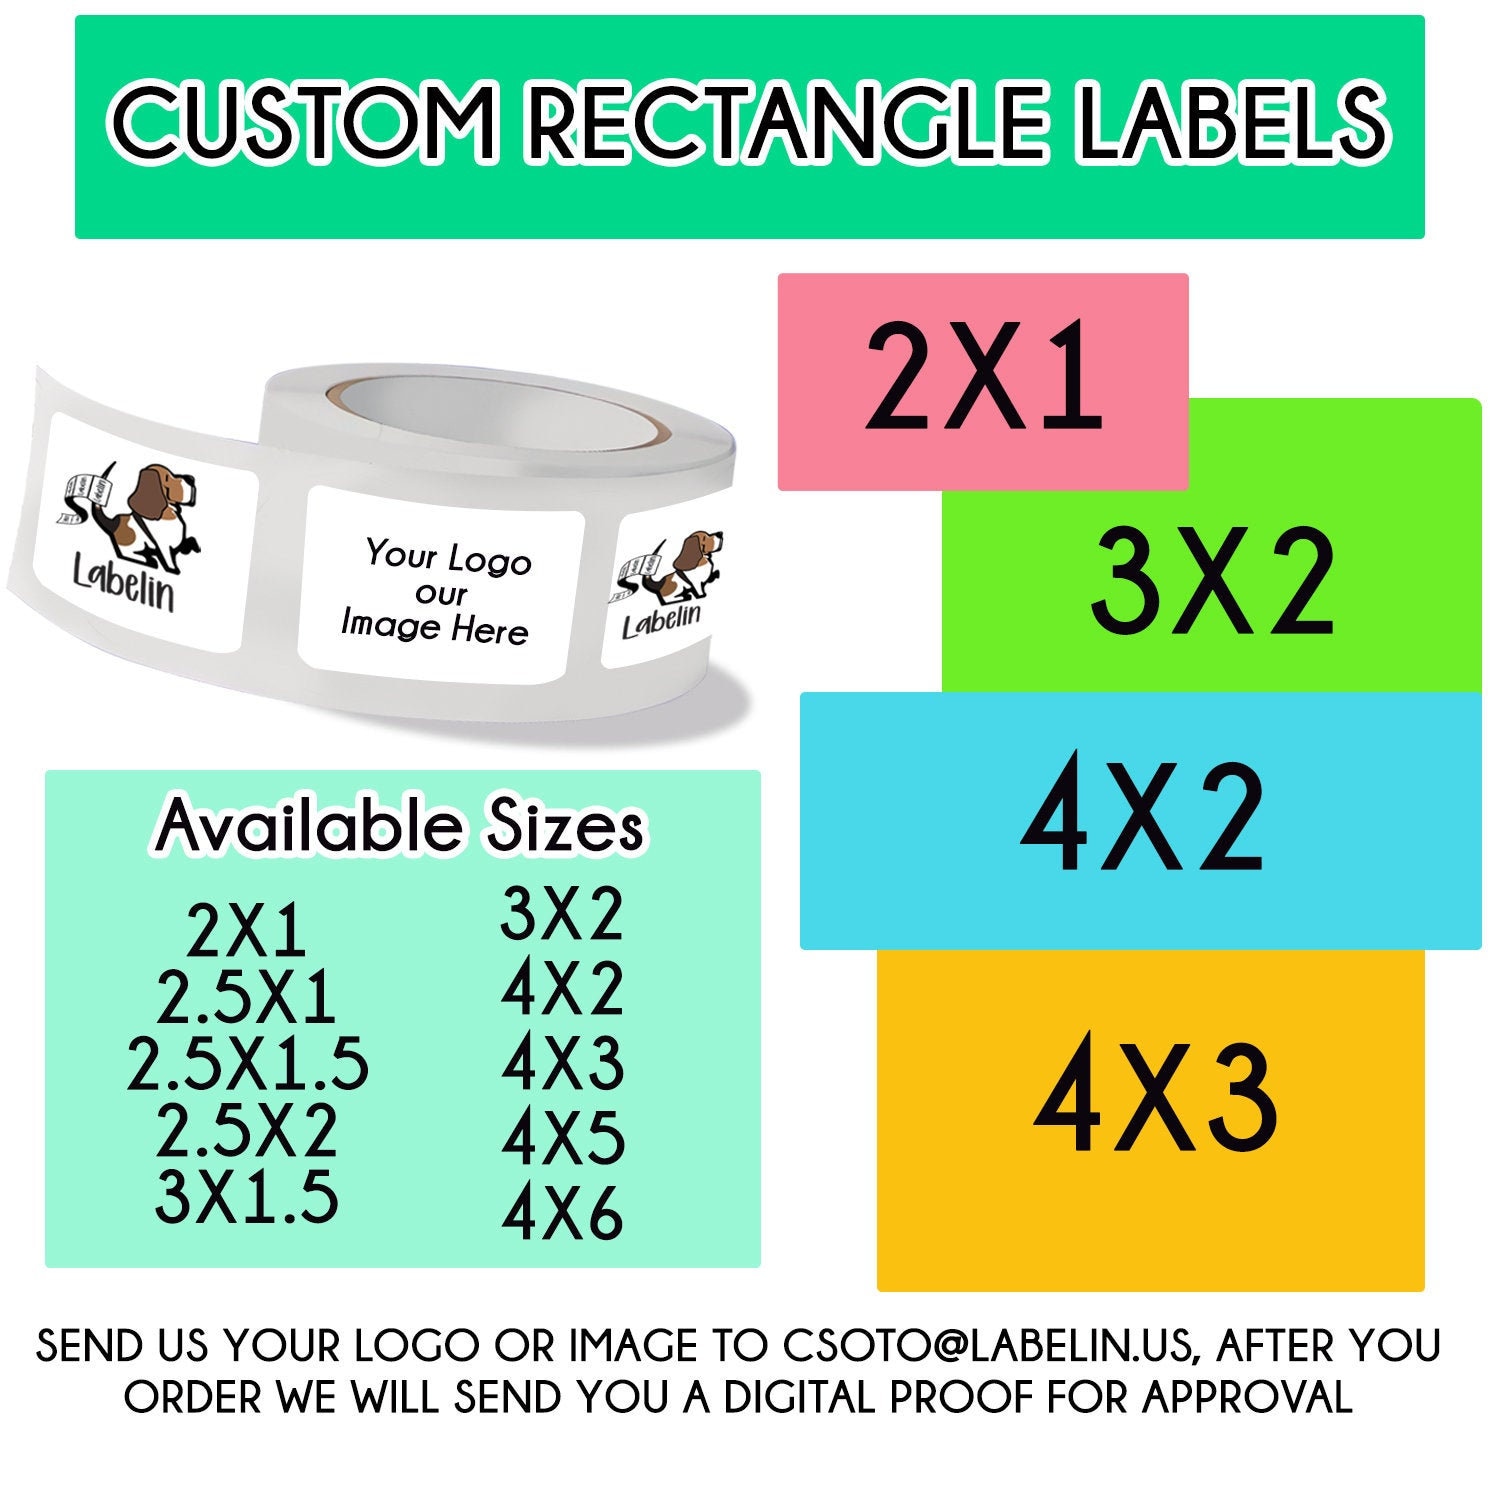 Custom Number Stickers - Rectangle/Square - RC SWAG - Stickers, T-Shirts,  Hoodies, RC Kits & More!